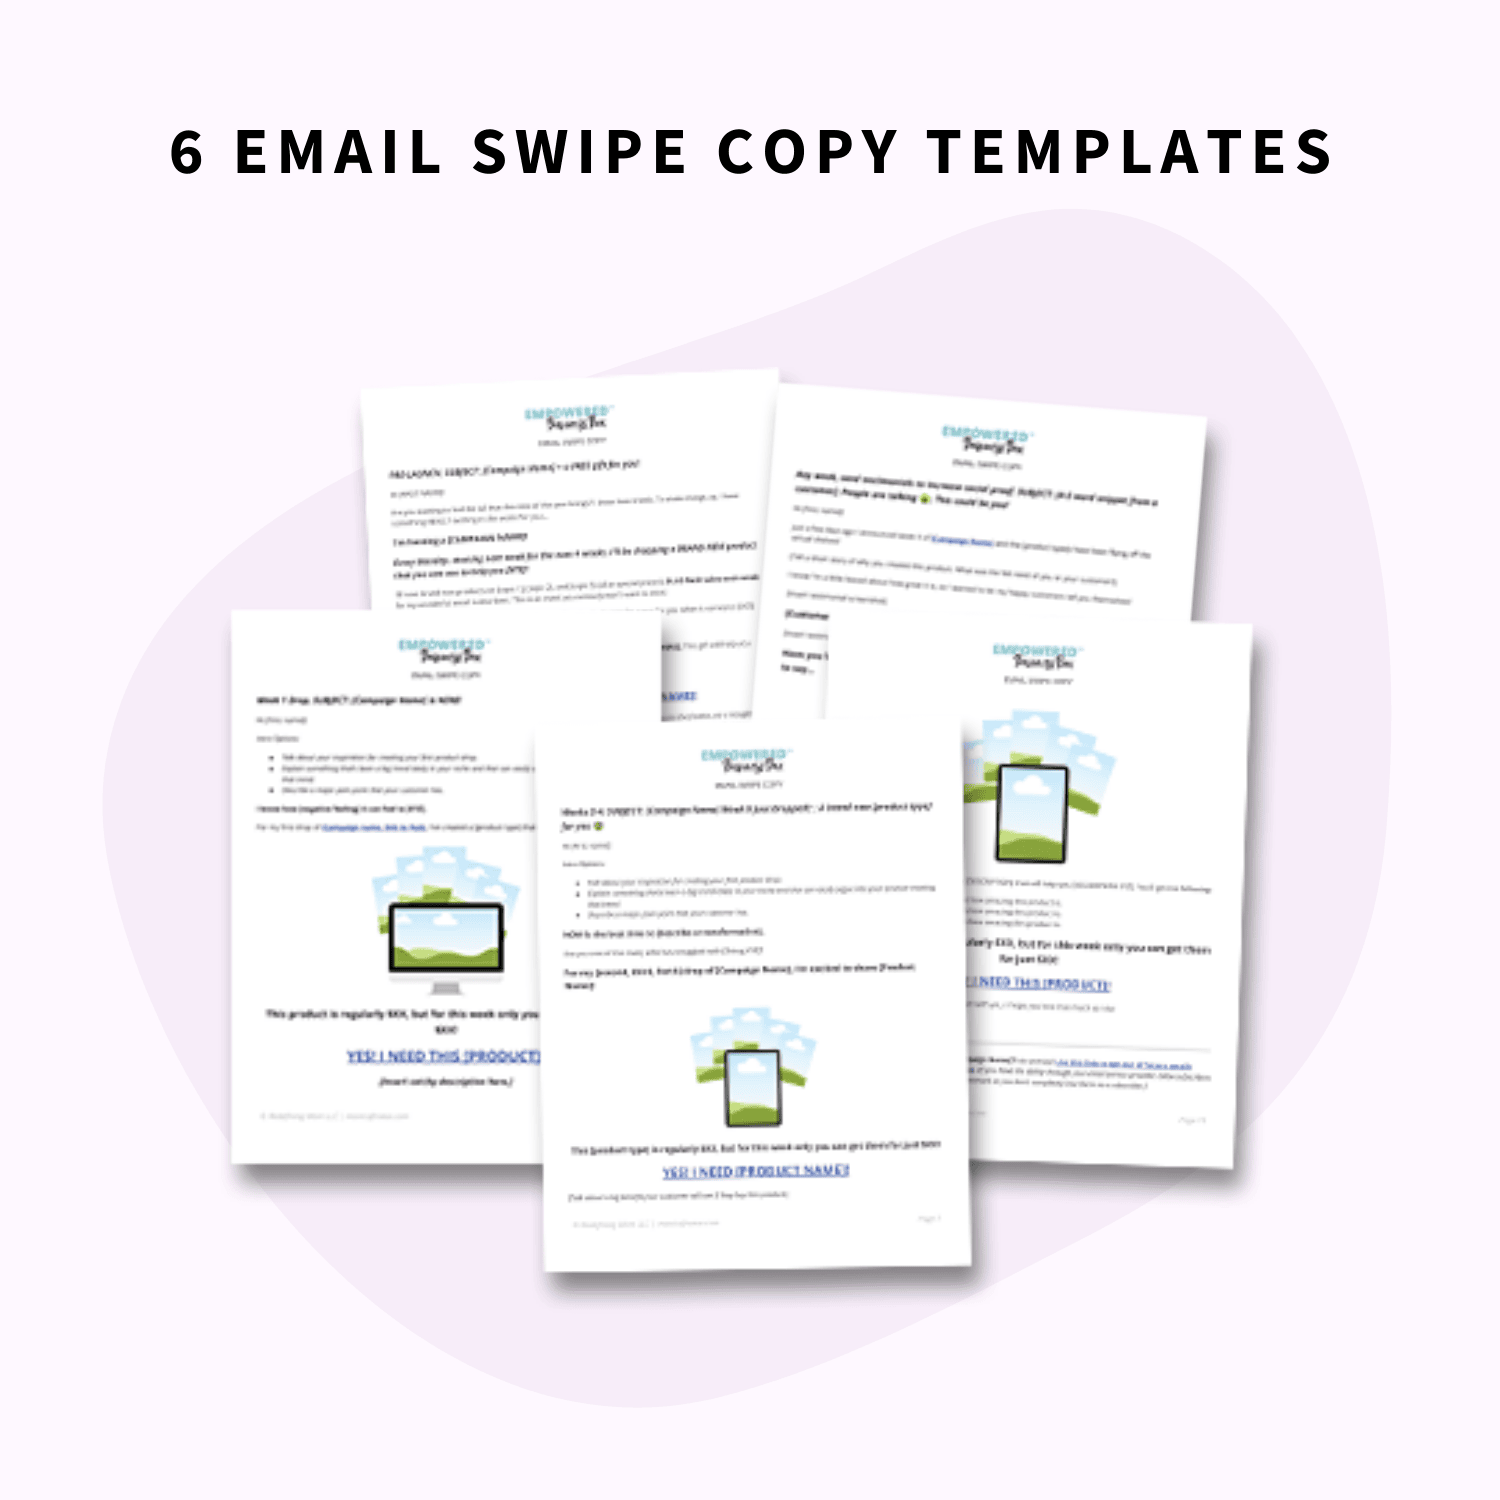 email swipe copy templates in the Digital Product Extravaganza Toolbox